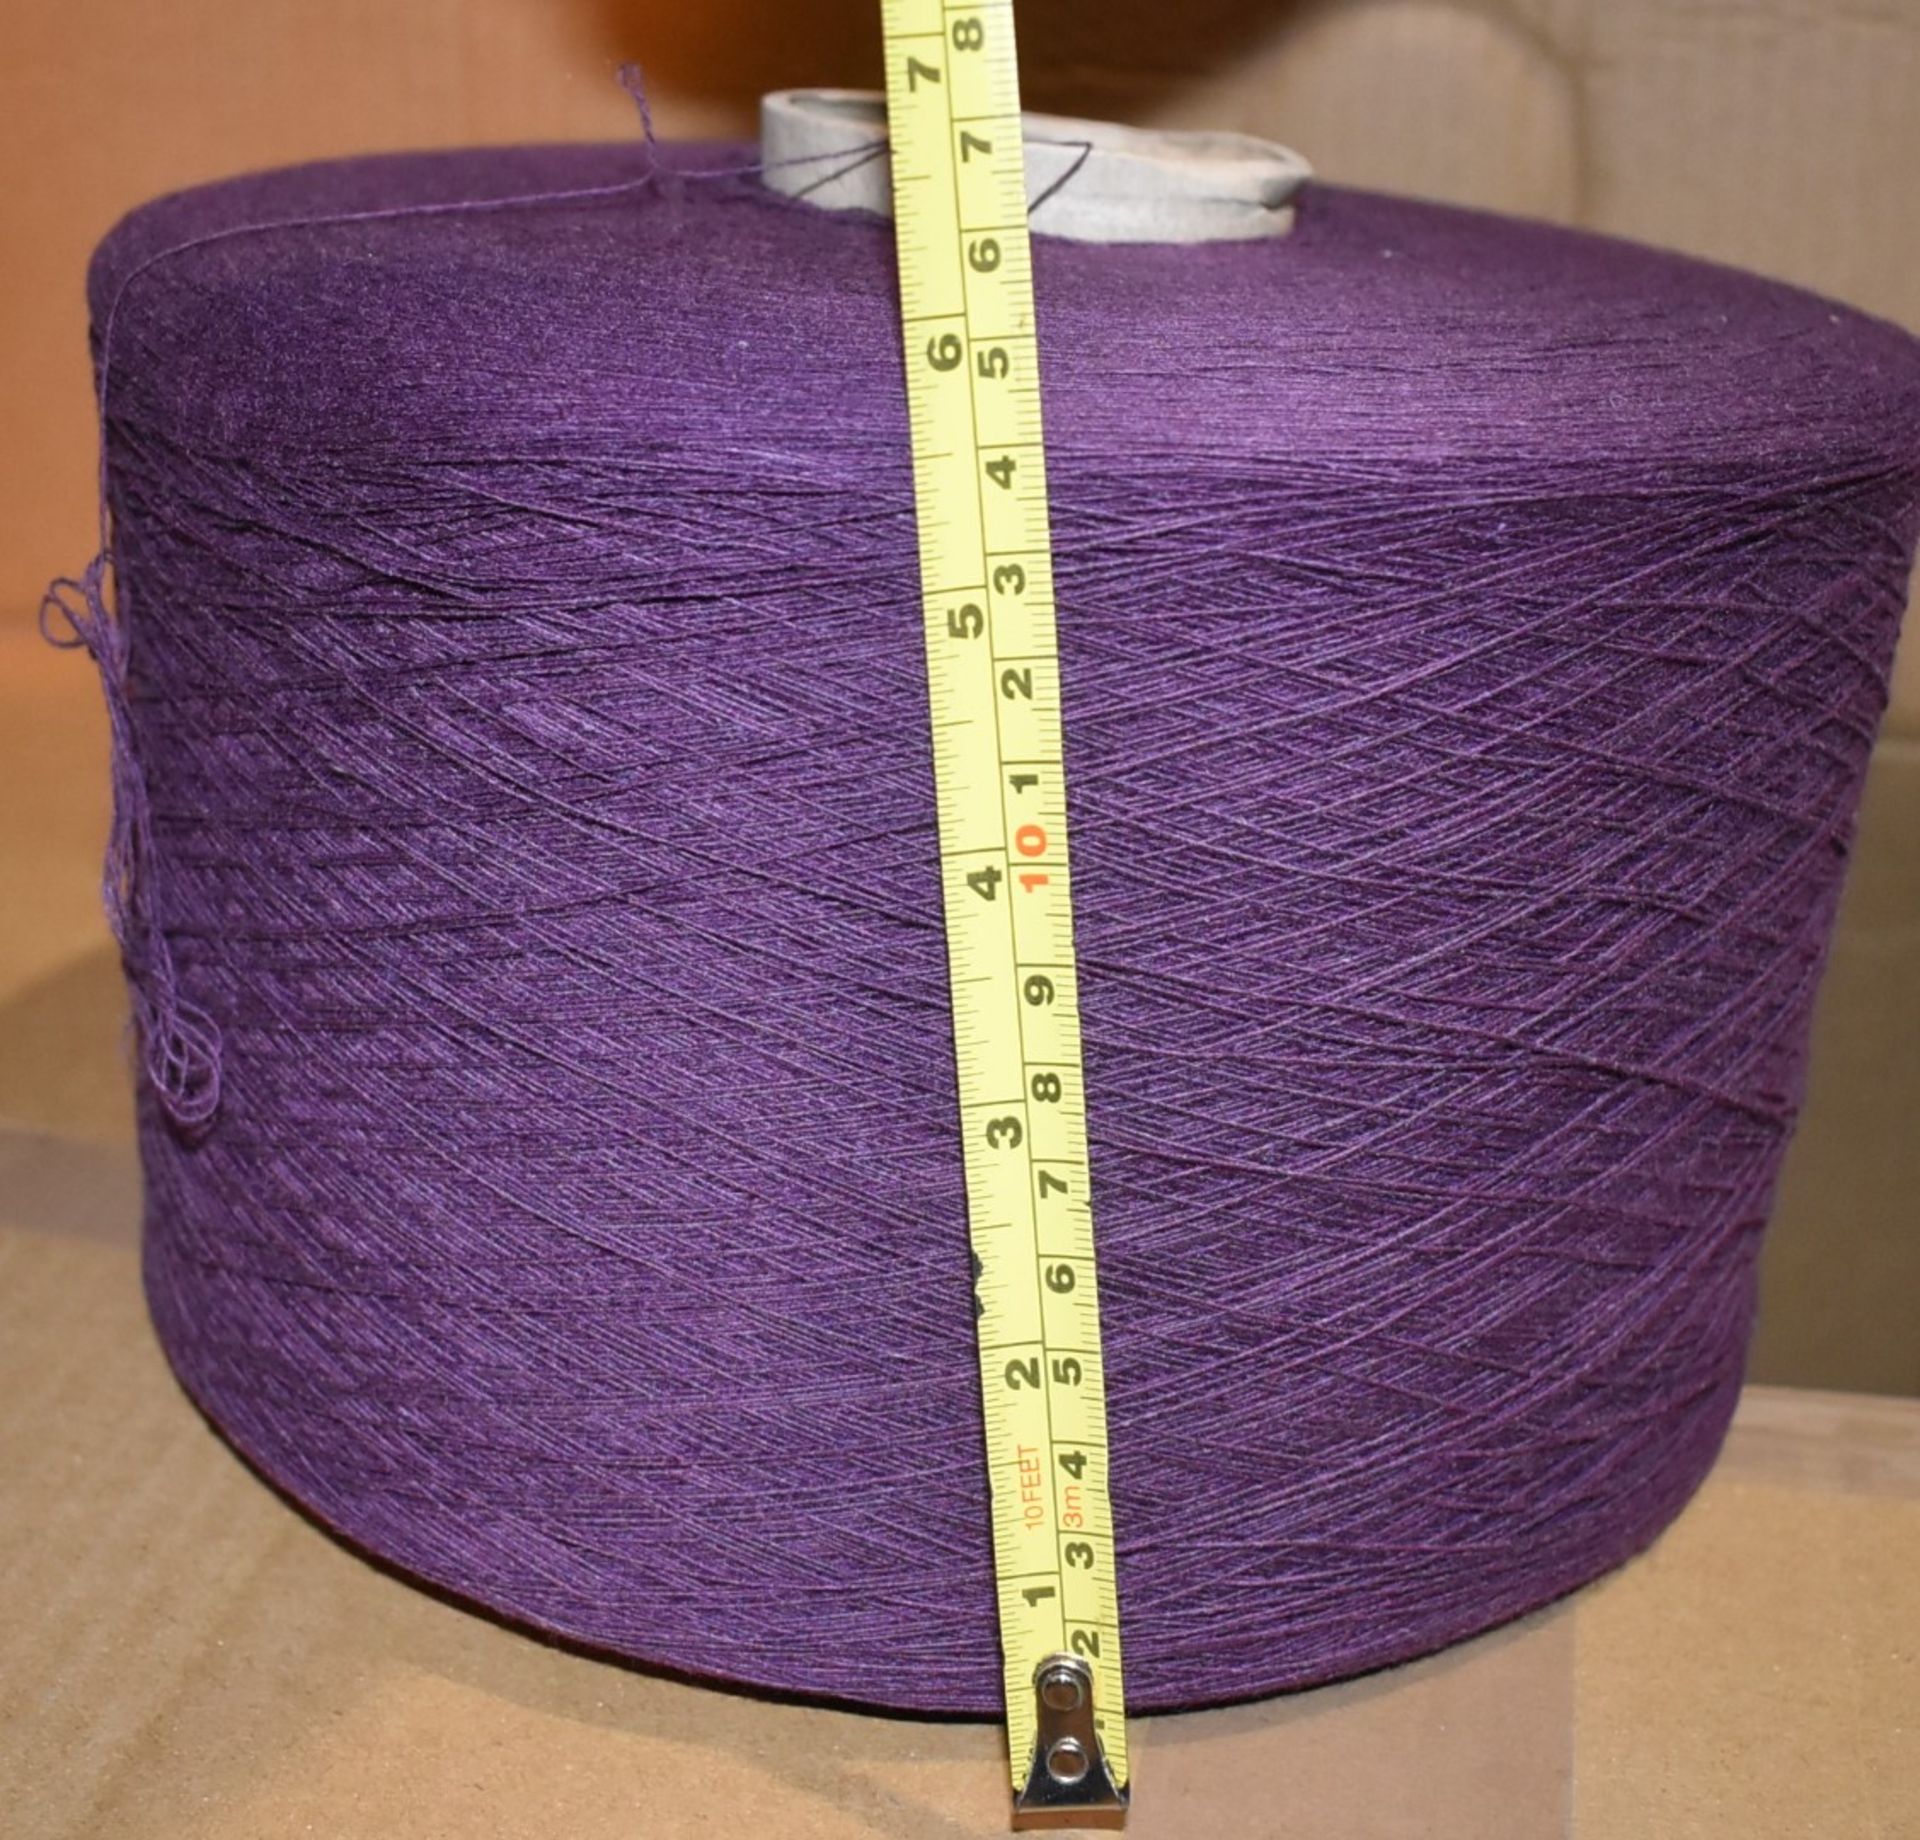 1 x Cone of 1/13 MicroCotton Knitting Yarn - Purple - Approx Weight: 2,300g - New Stock ABL Yarn - Image 9 of 10